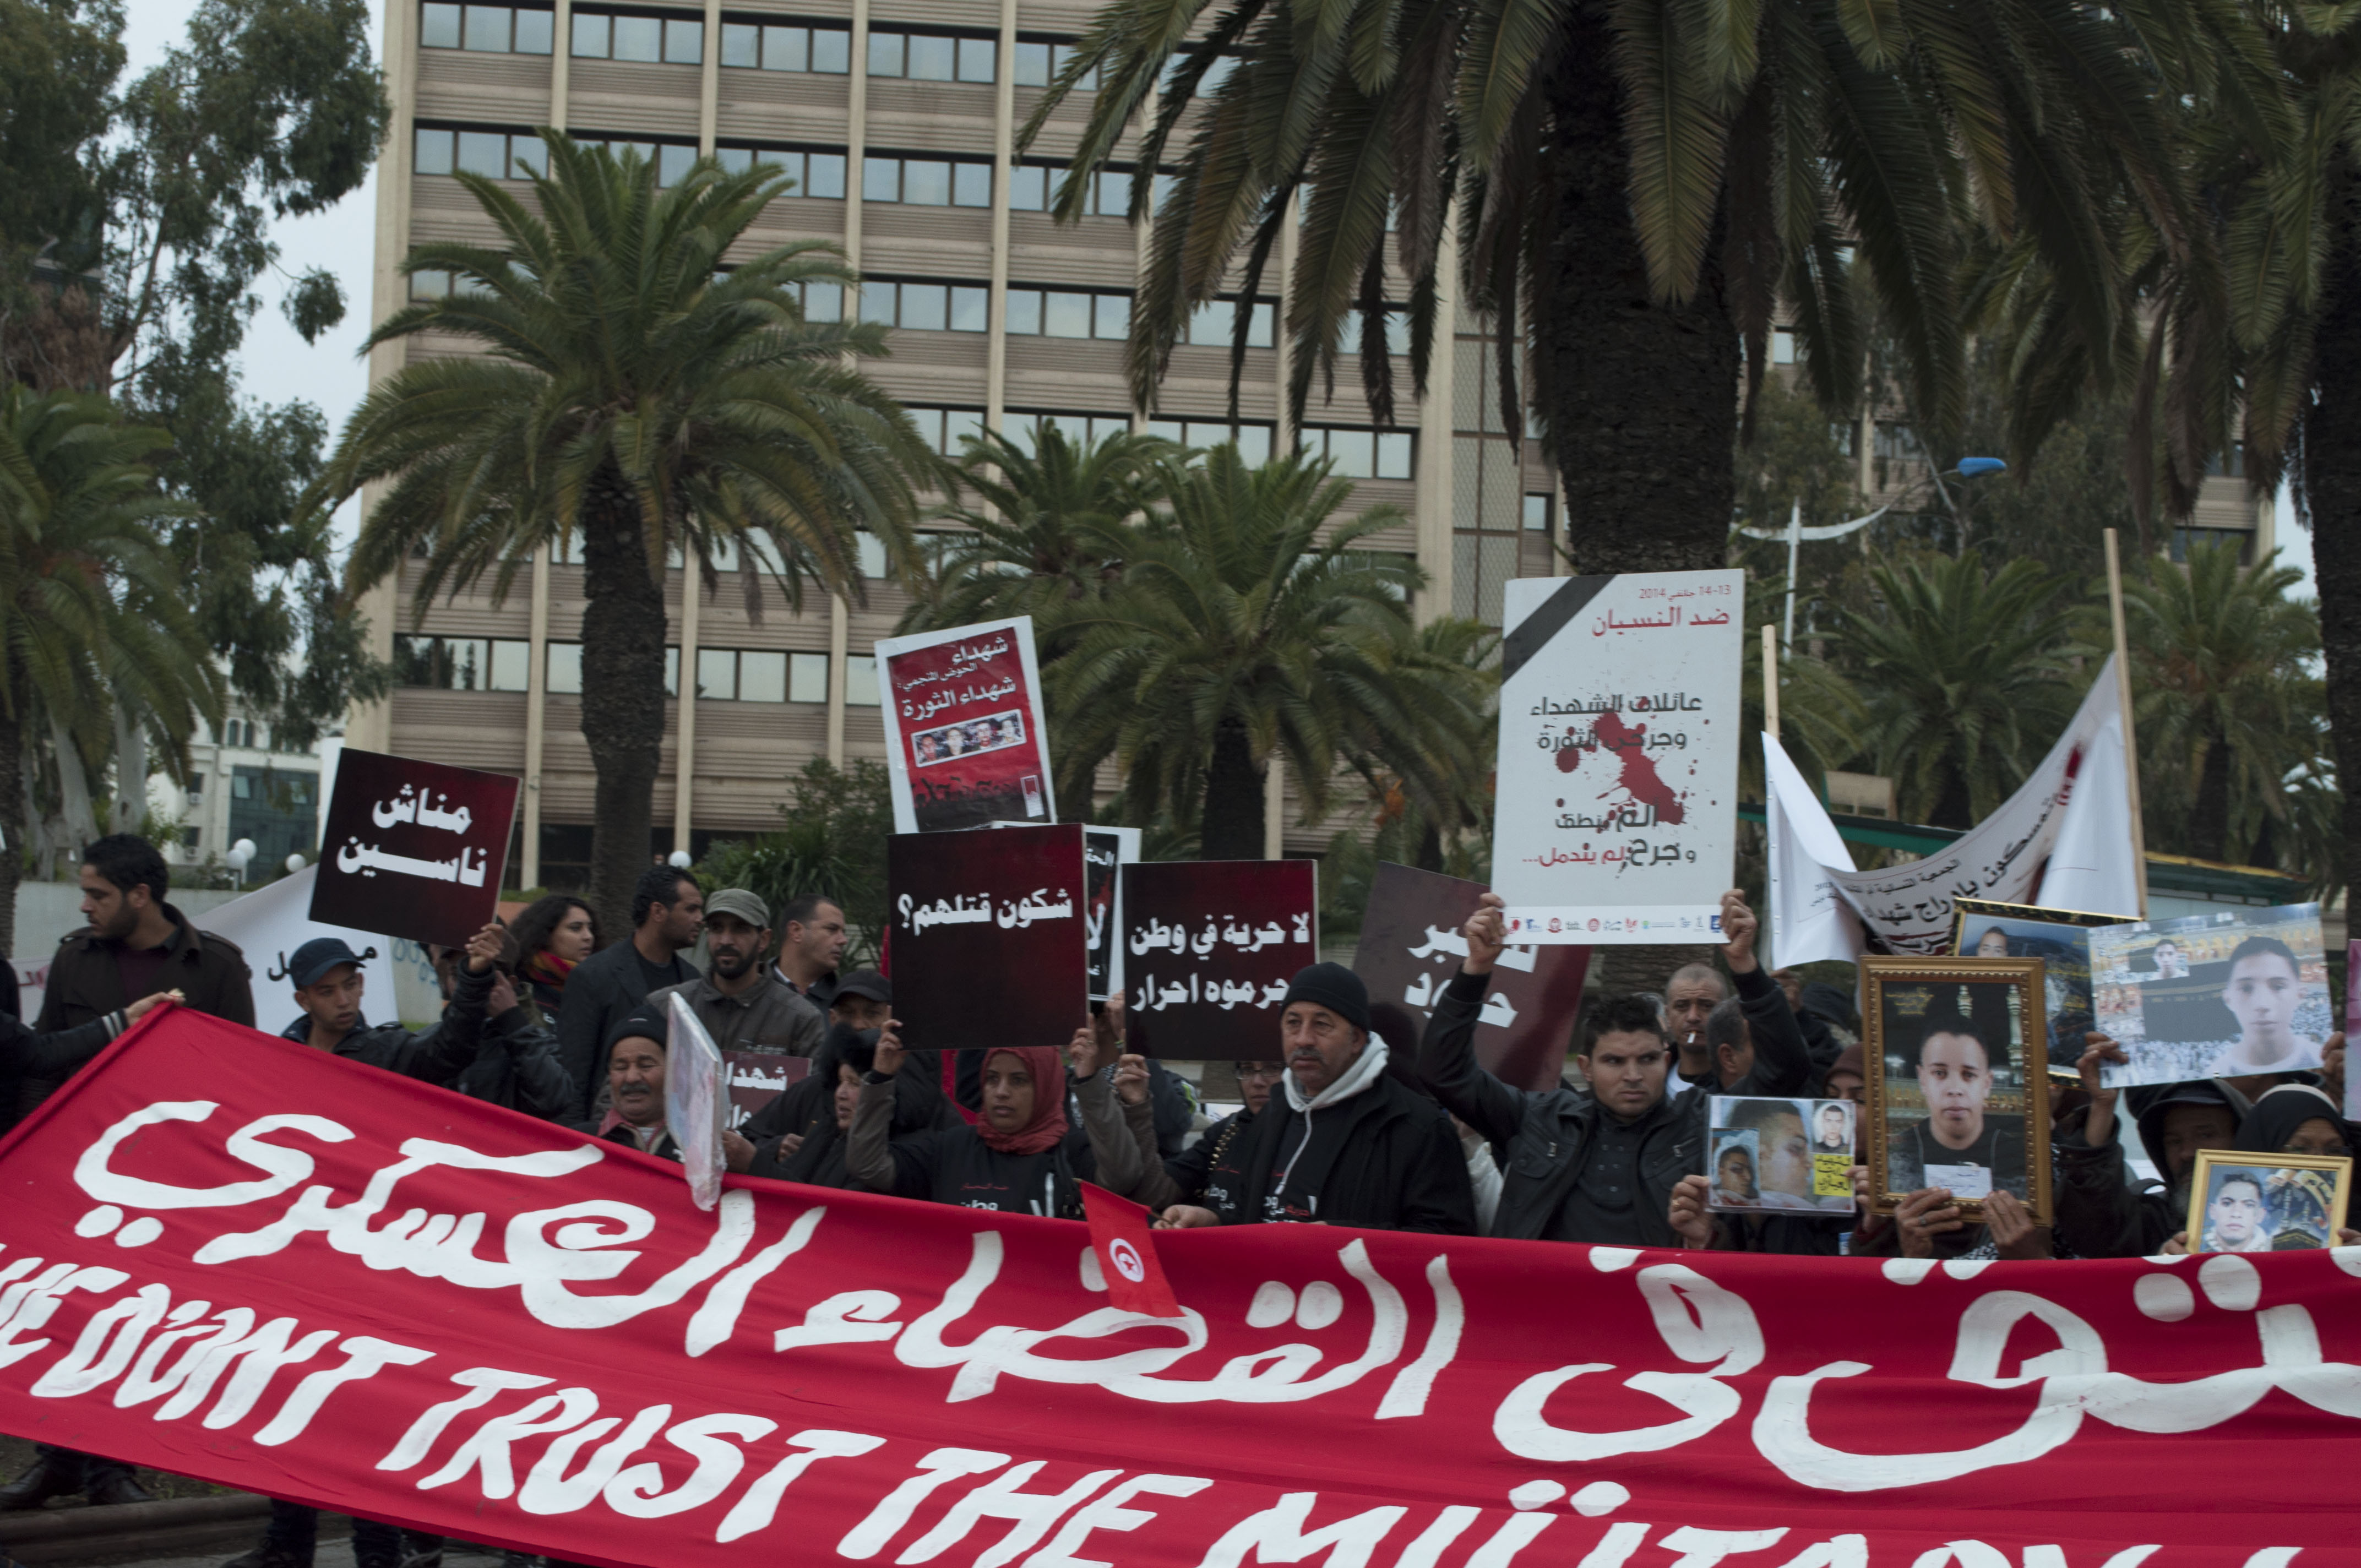 Demonstration against military courts in Tunisia (photo: Sarah Mersch)